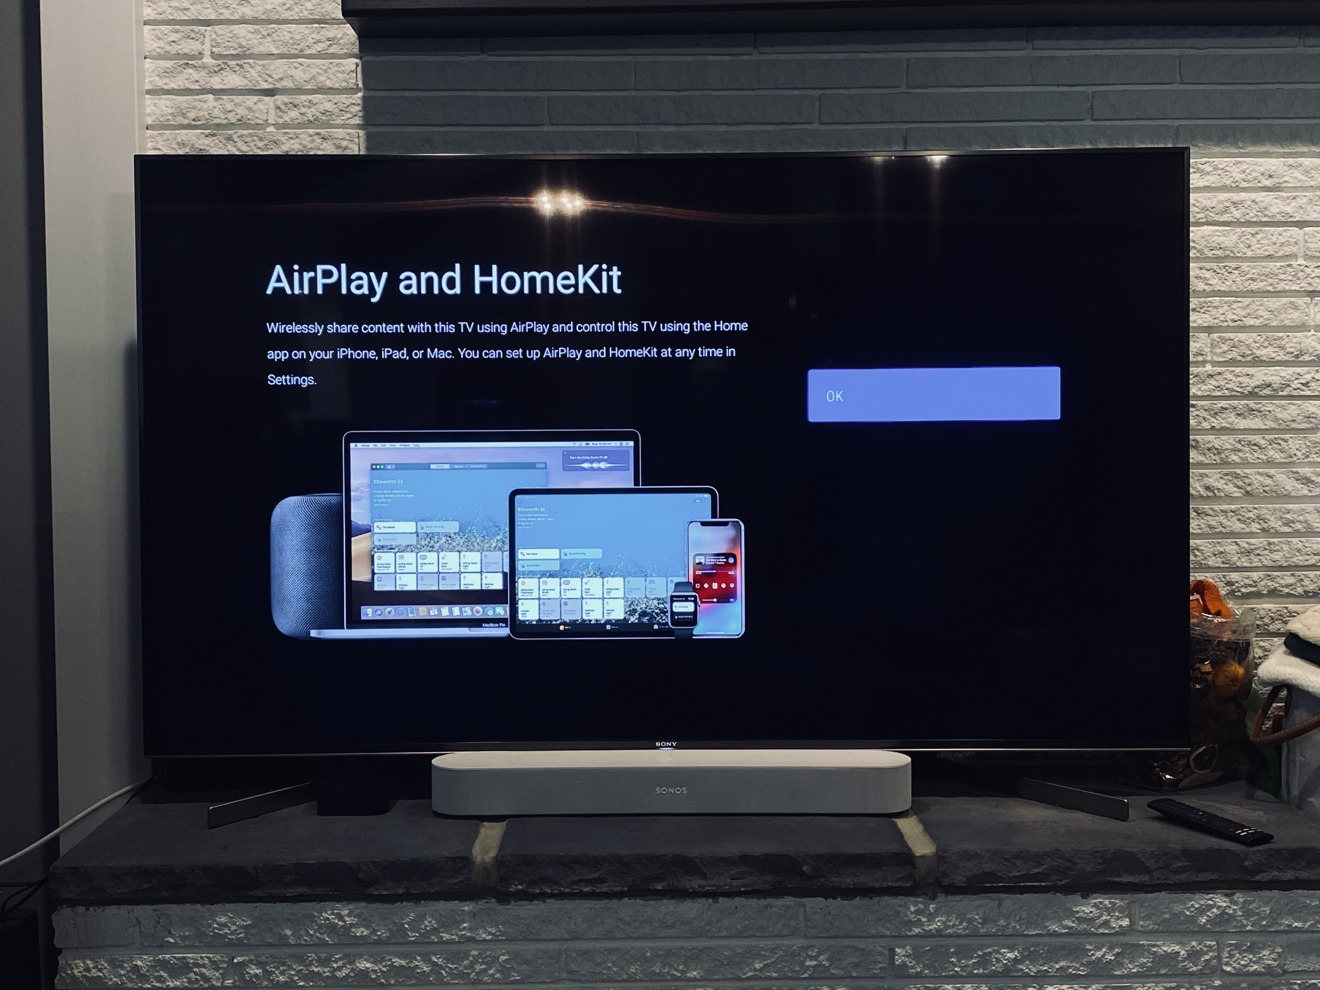 Hot And Airplay 2 On Sony Smart Tvs, How To Mirror Iphone Sony Bravia Android Tv